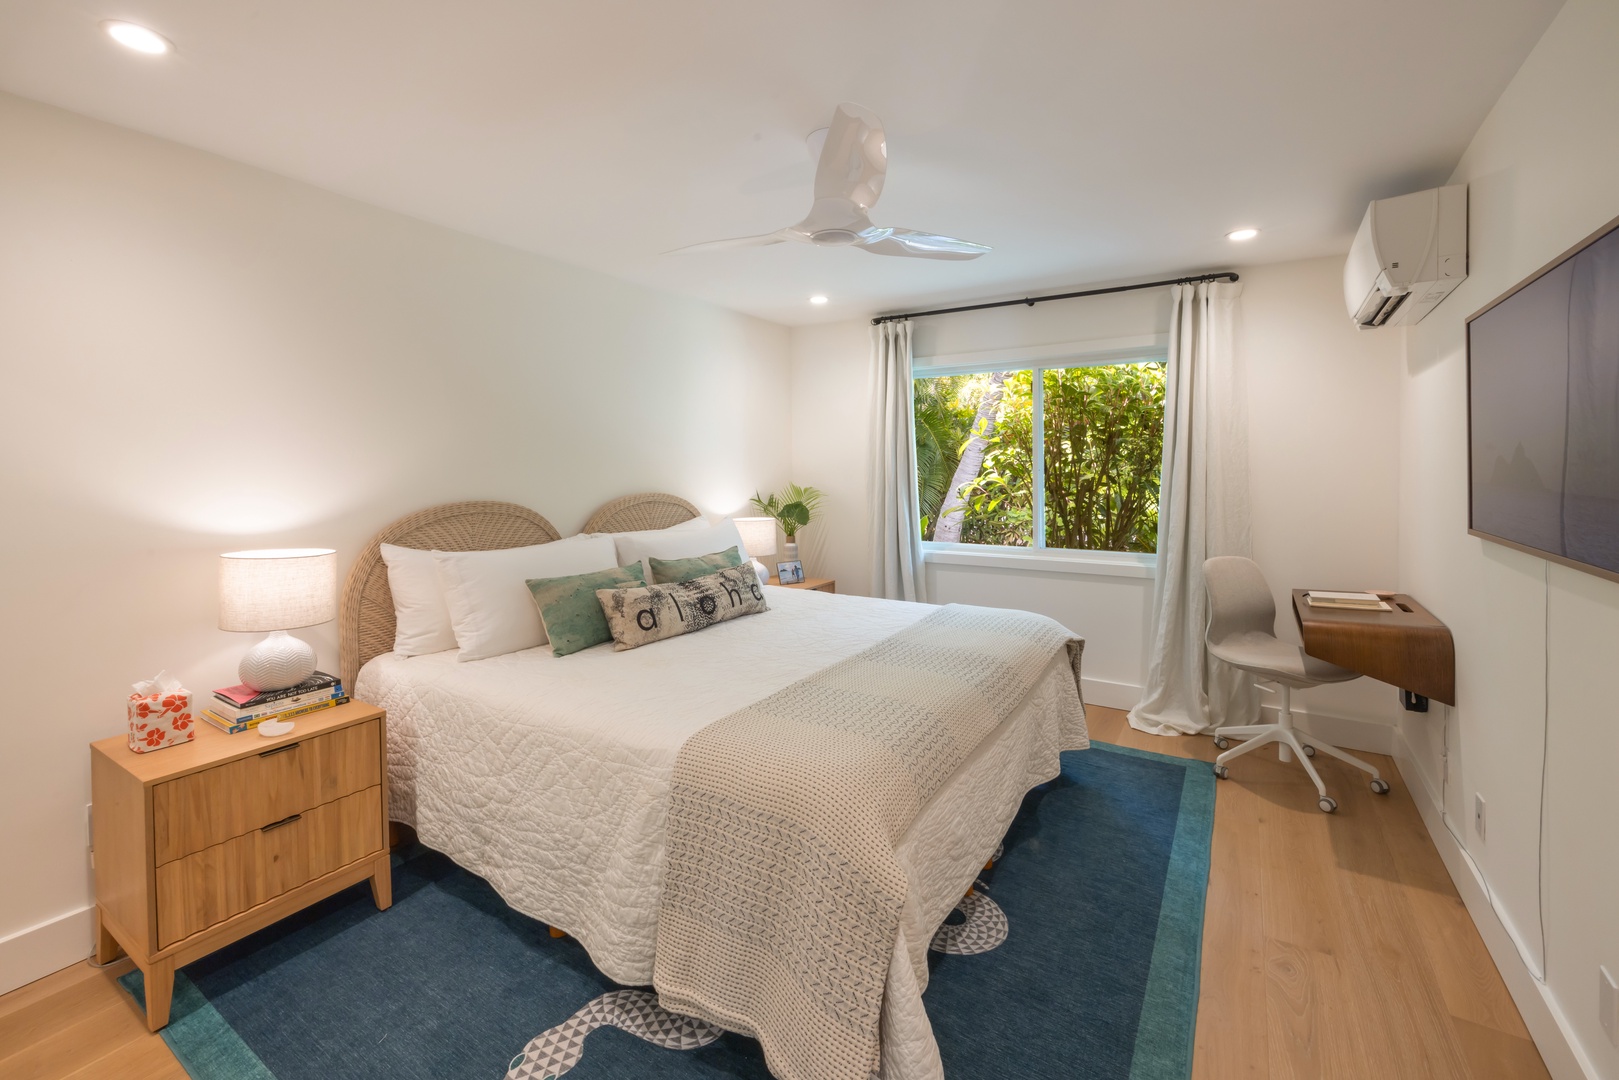 Kailua Vacation Rentals, Lanikai Ola Nani - The guest suite comes with a twin-convertible-to-king bed, split-type AC, and a dedicated home office.